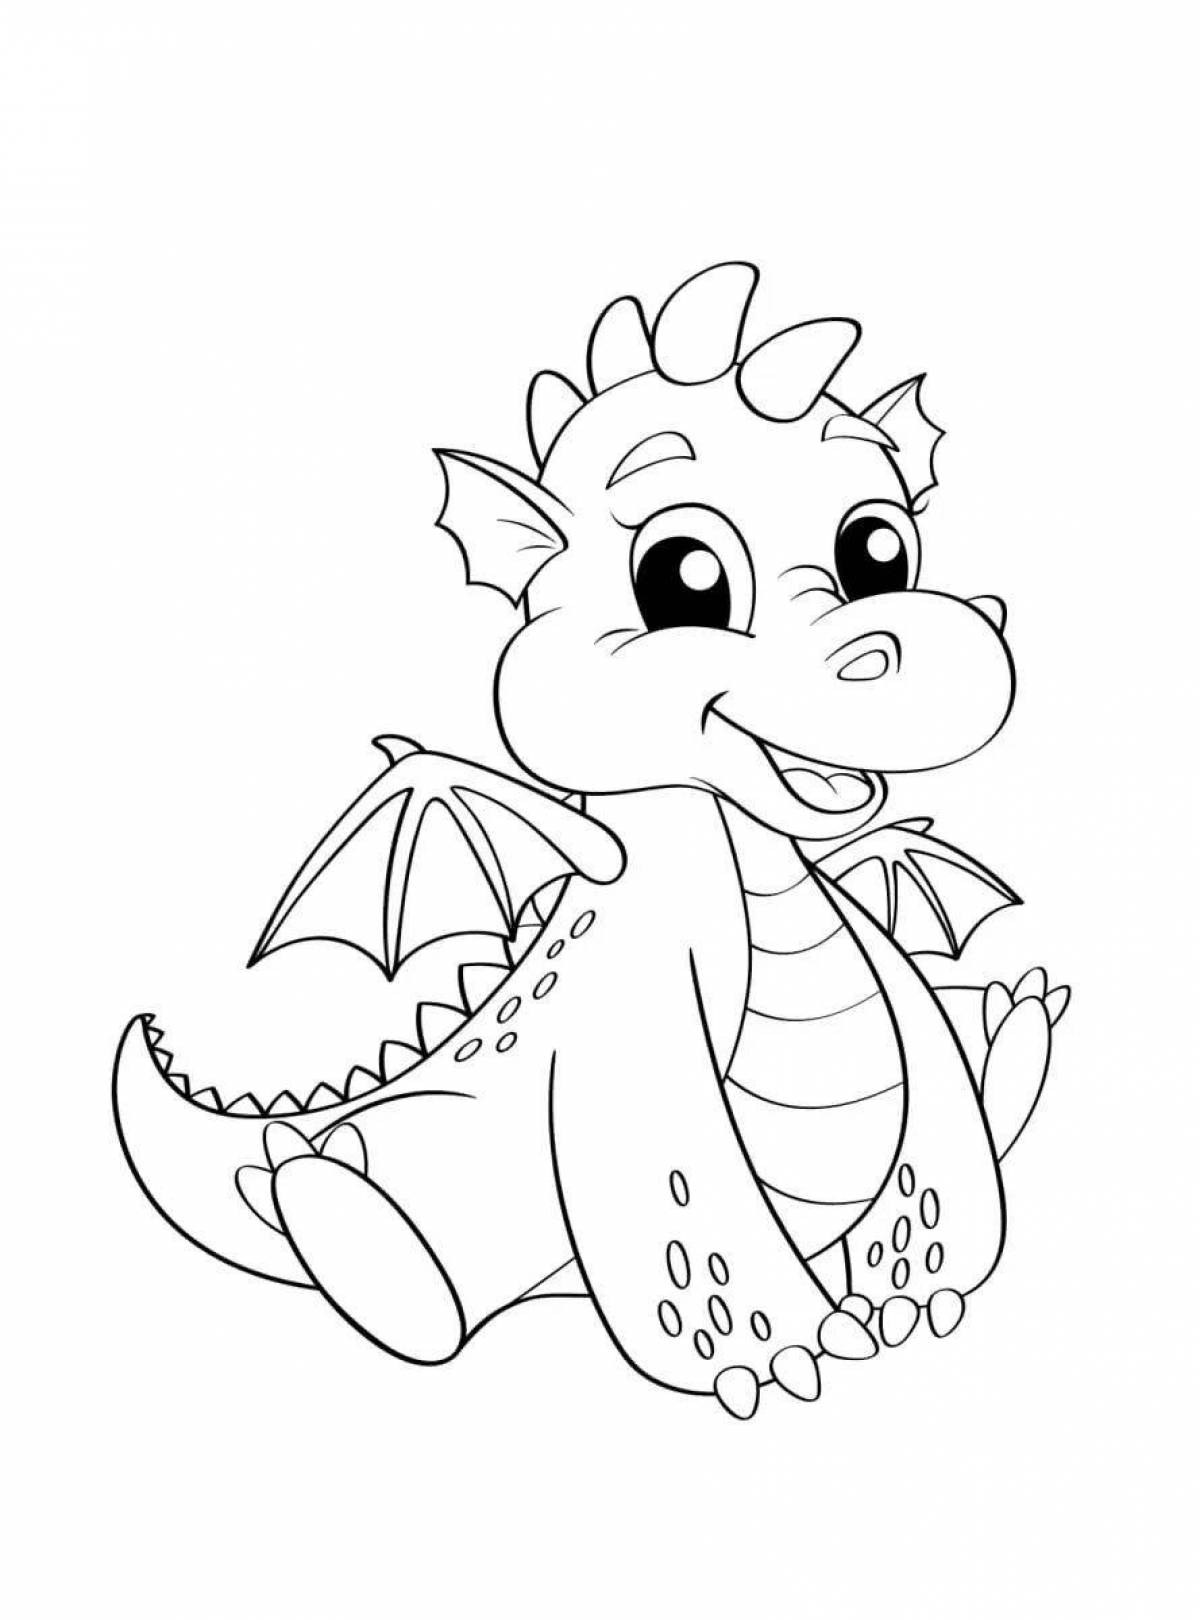 Colorful dragons coloring pages for kids